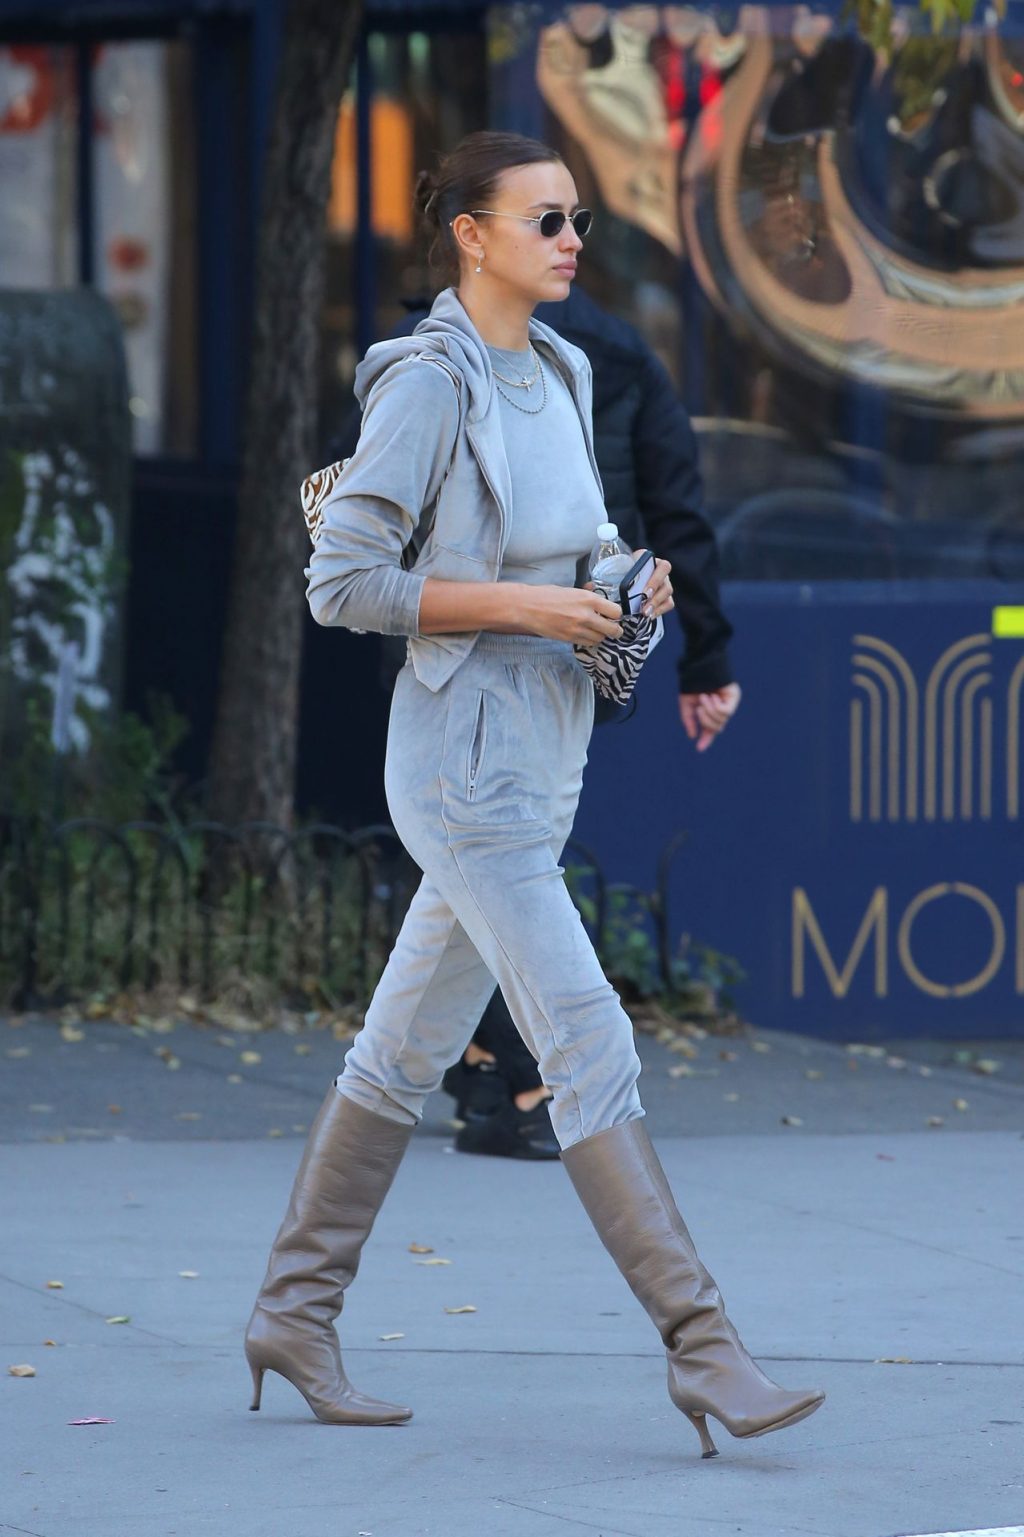 Irina Shayk Catches the Eye of a Construction Worker in New York City (80 Photos)